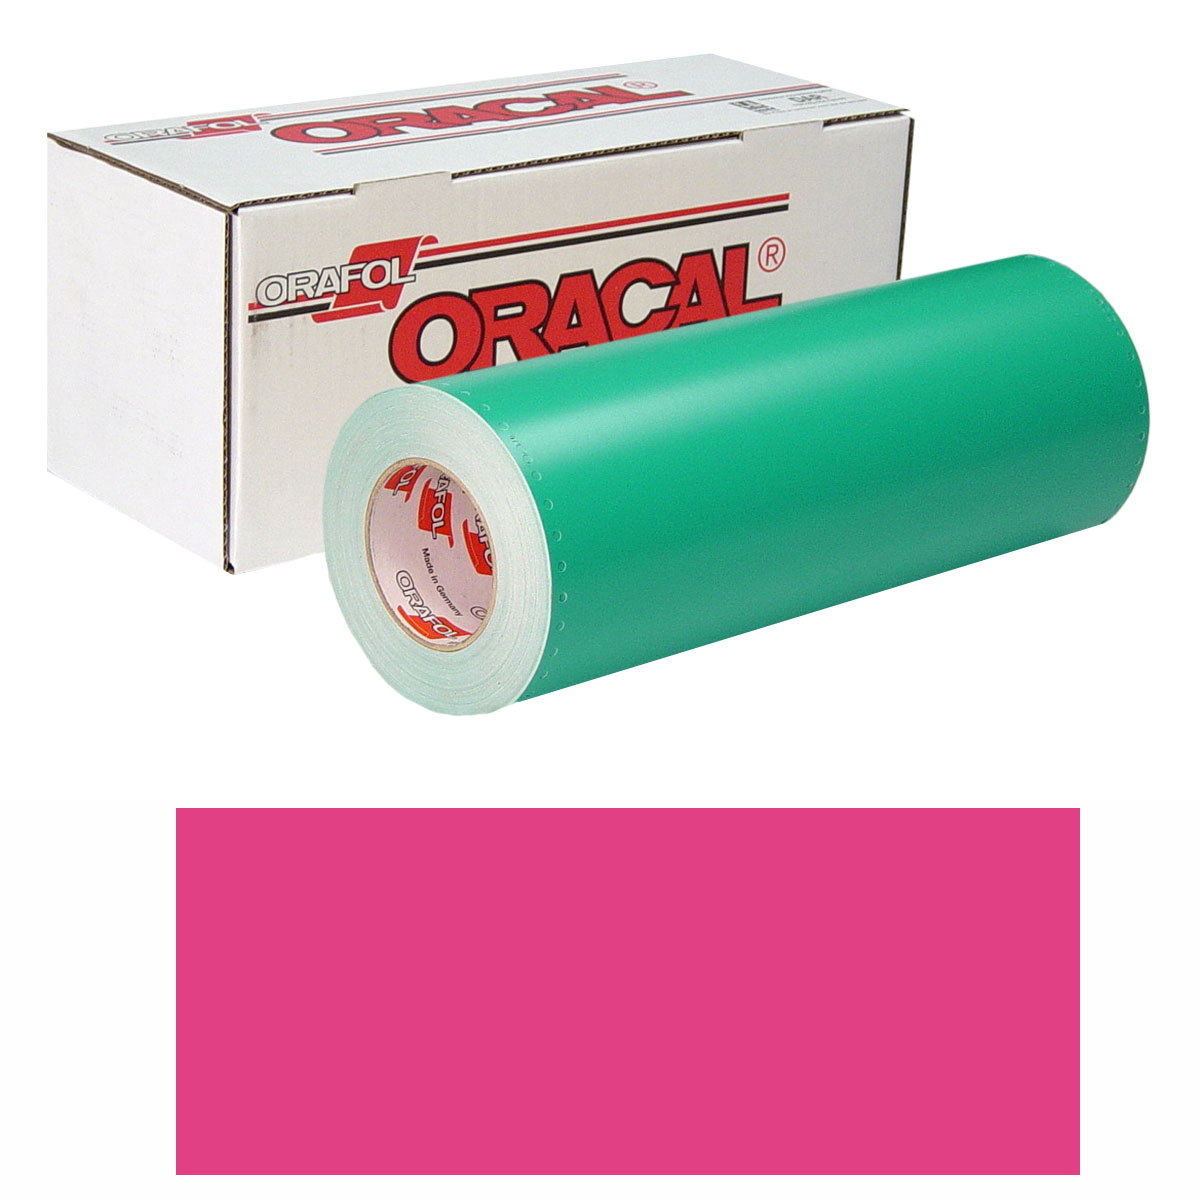 ORACAL 8500 30in X 10yd 041 Pink